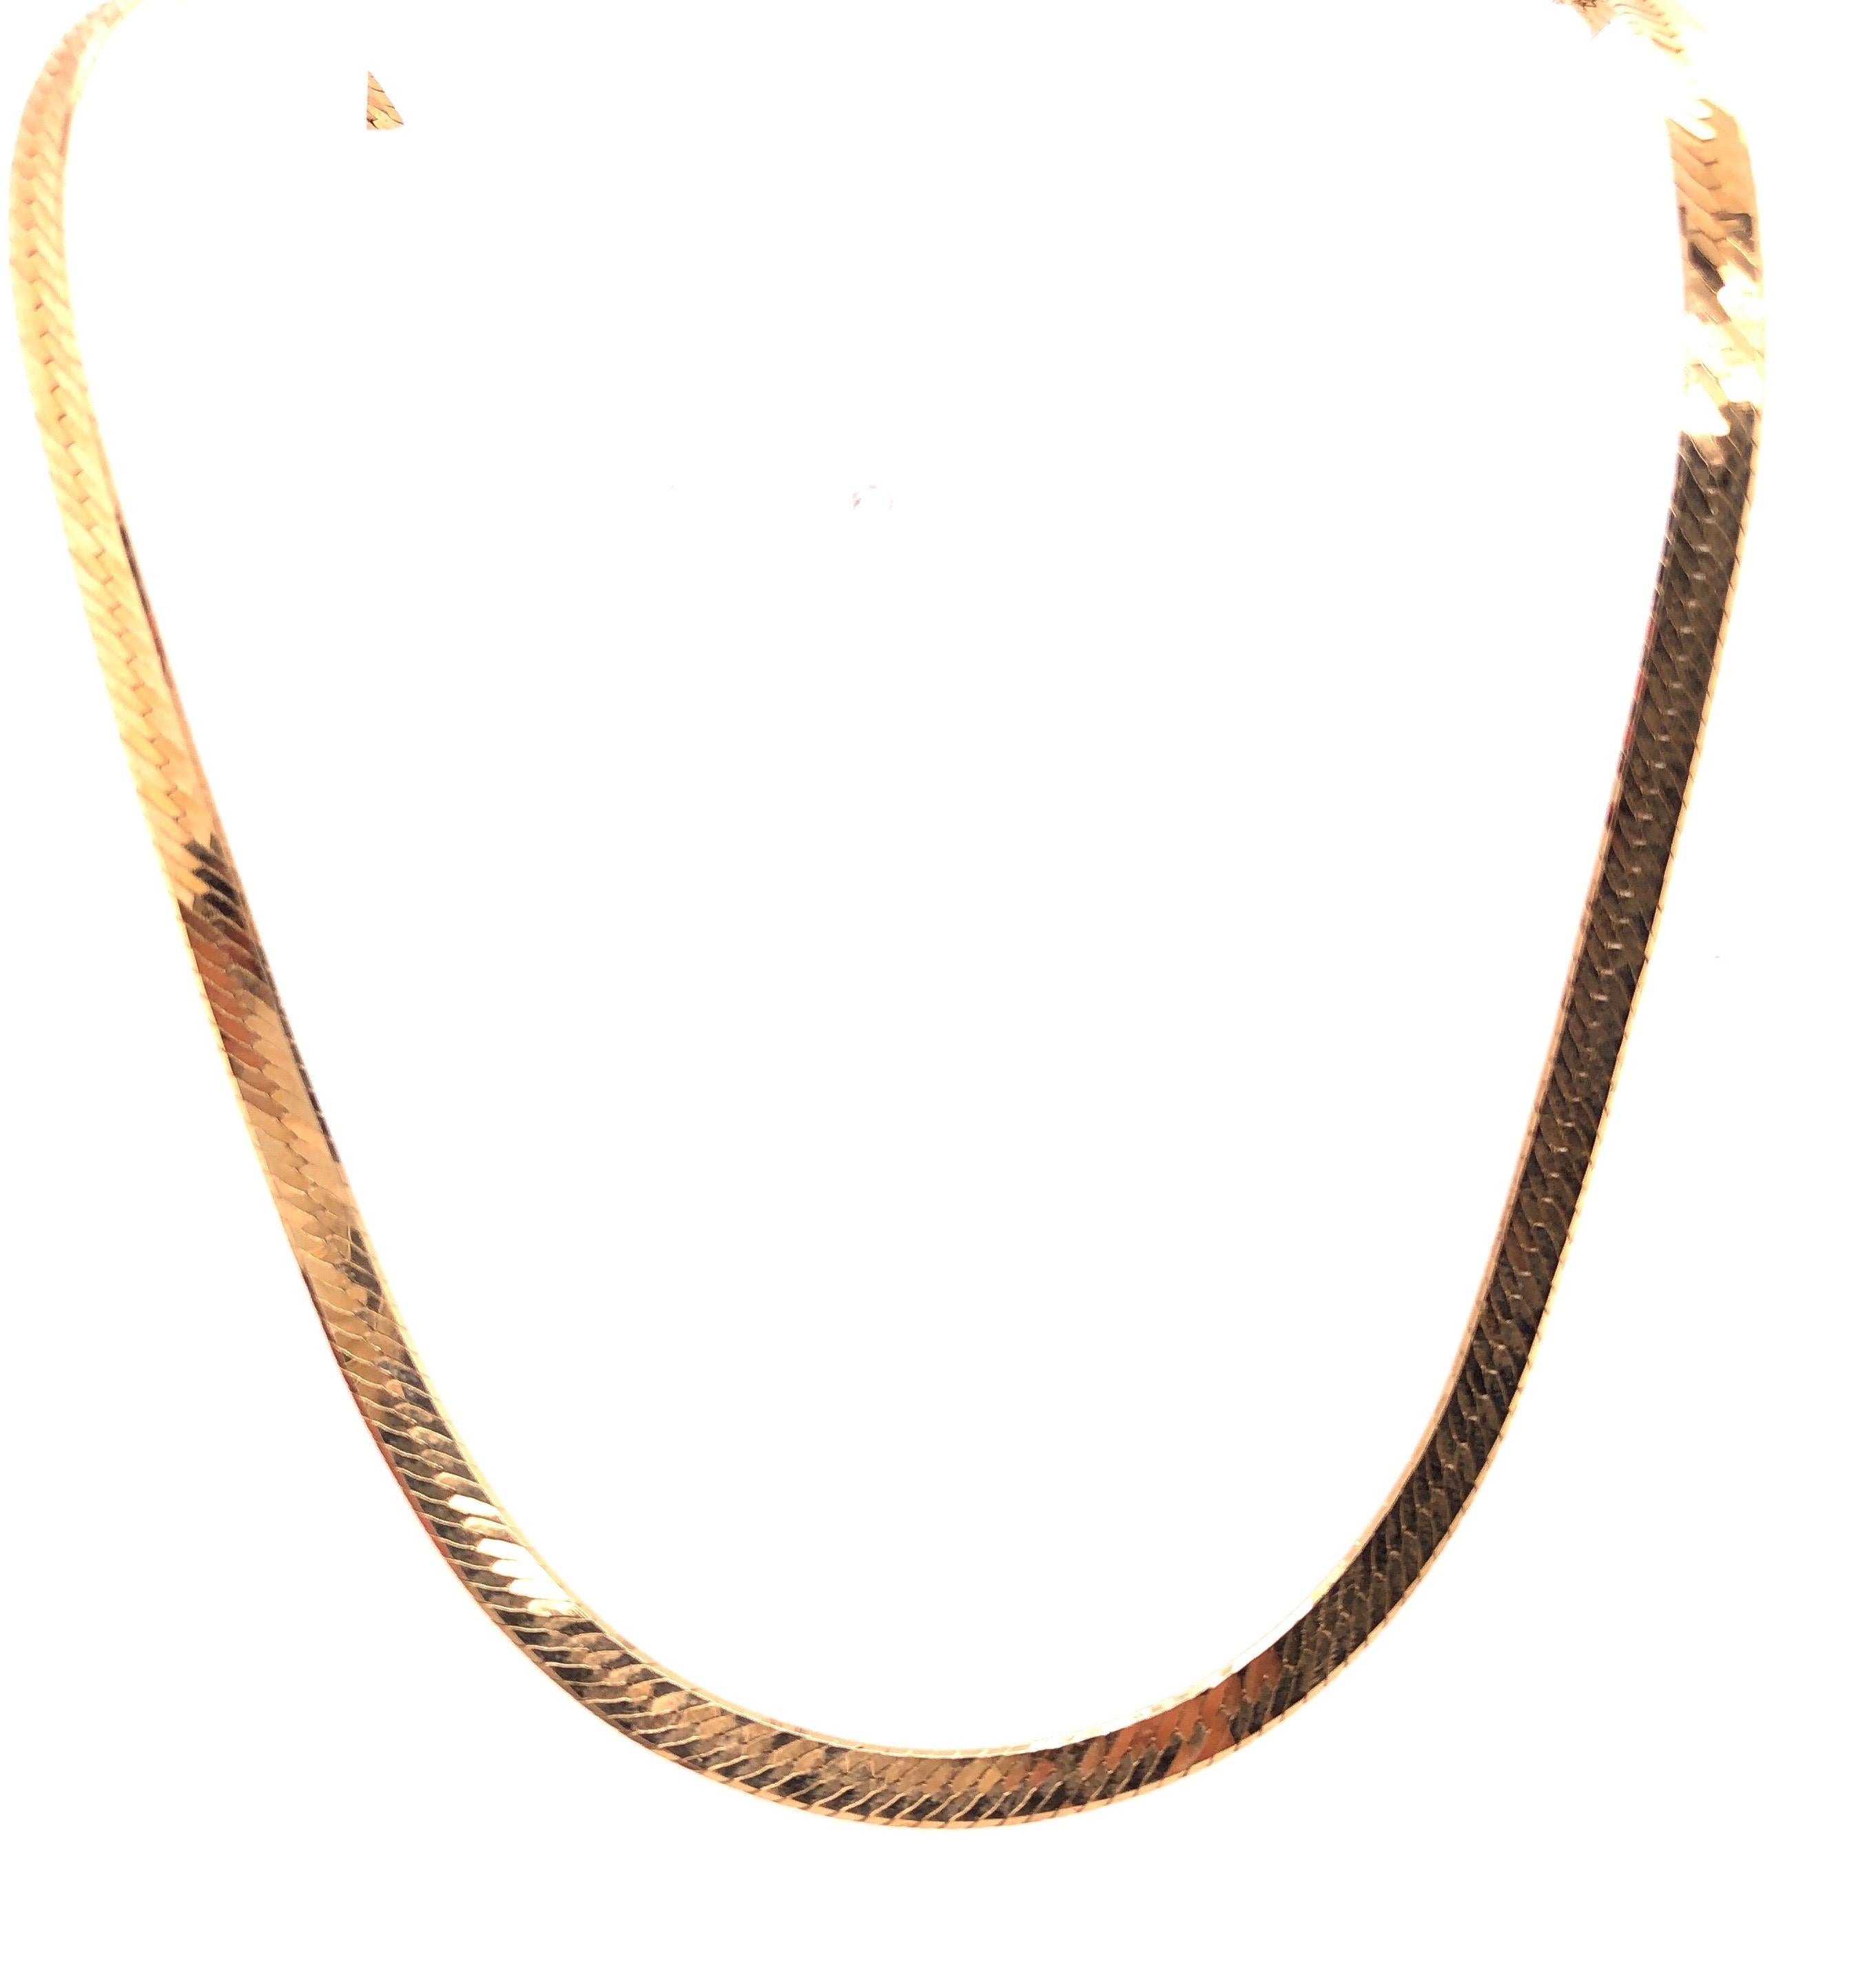 14Kt Yellow Gold 18 inch Snake Necklace
Width 5 and 12.31 grams total weight
